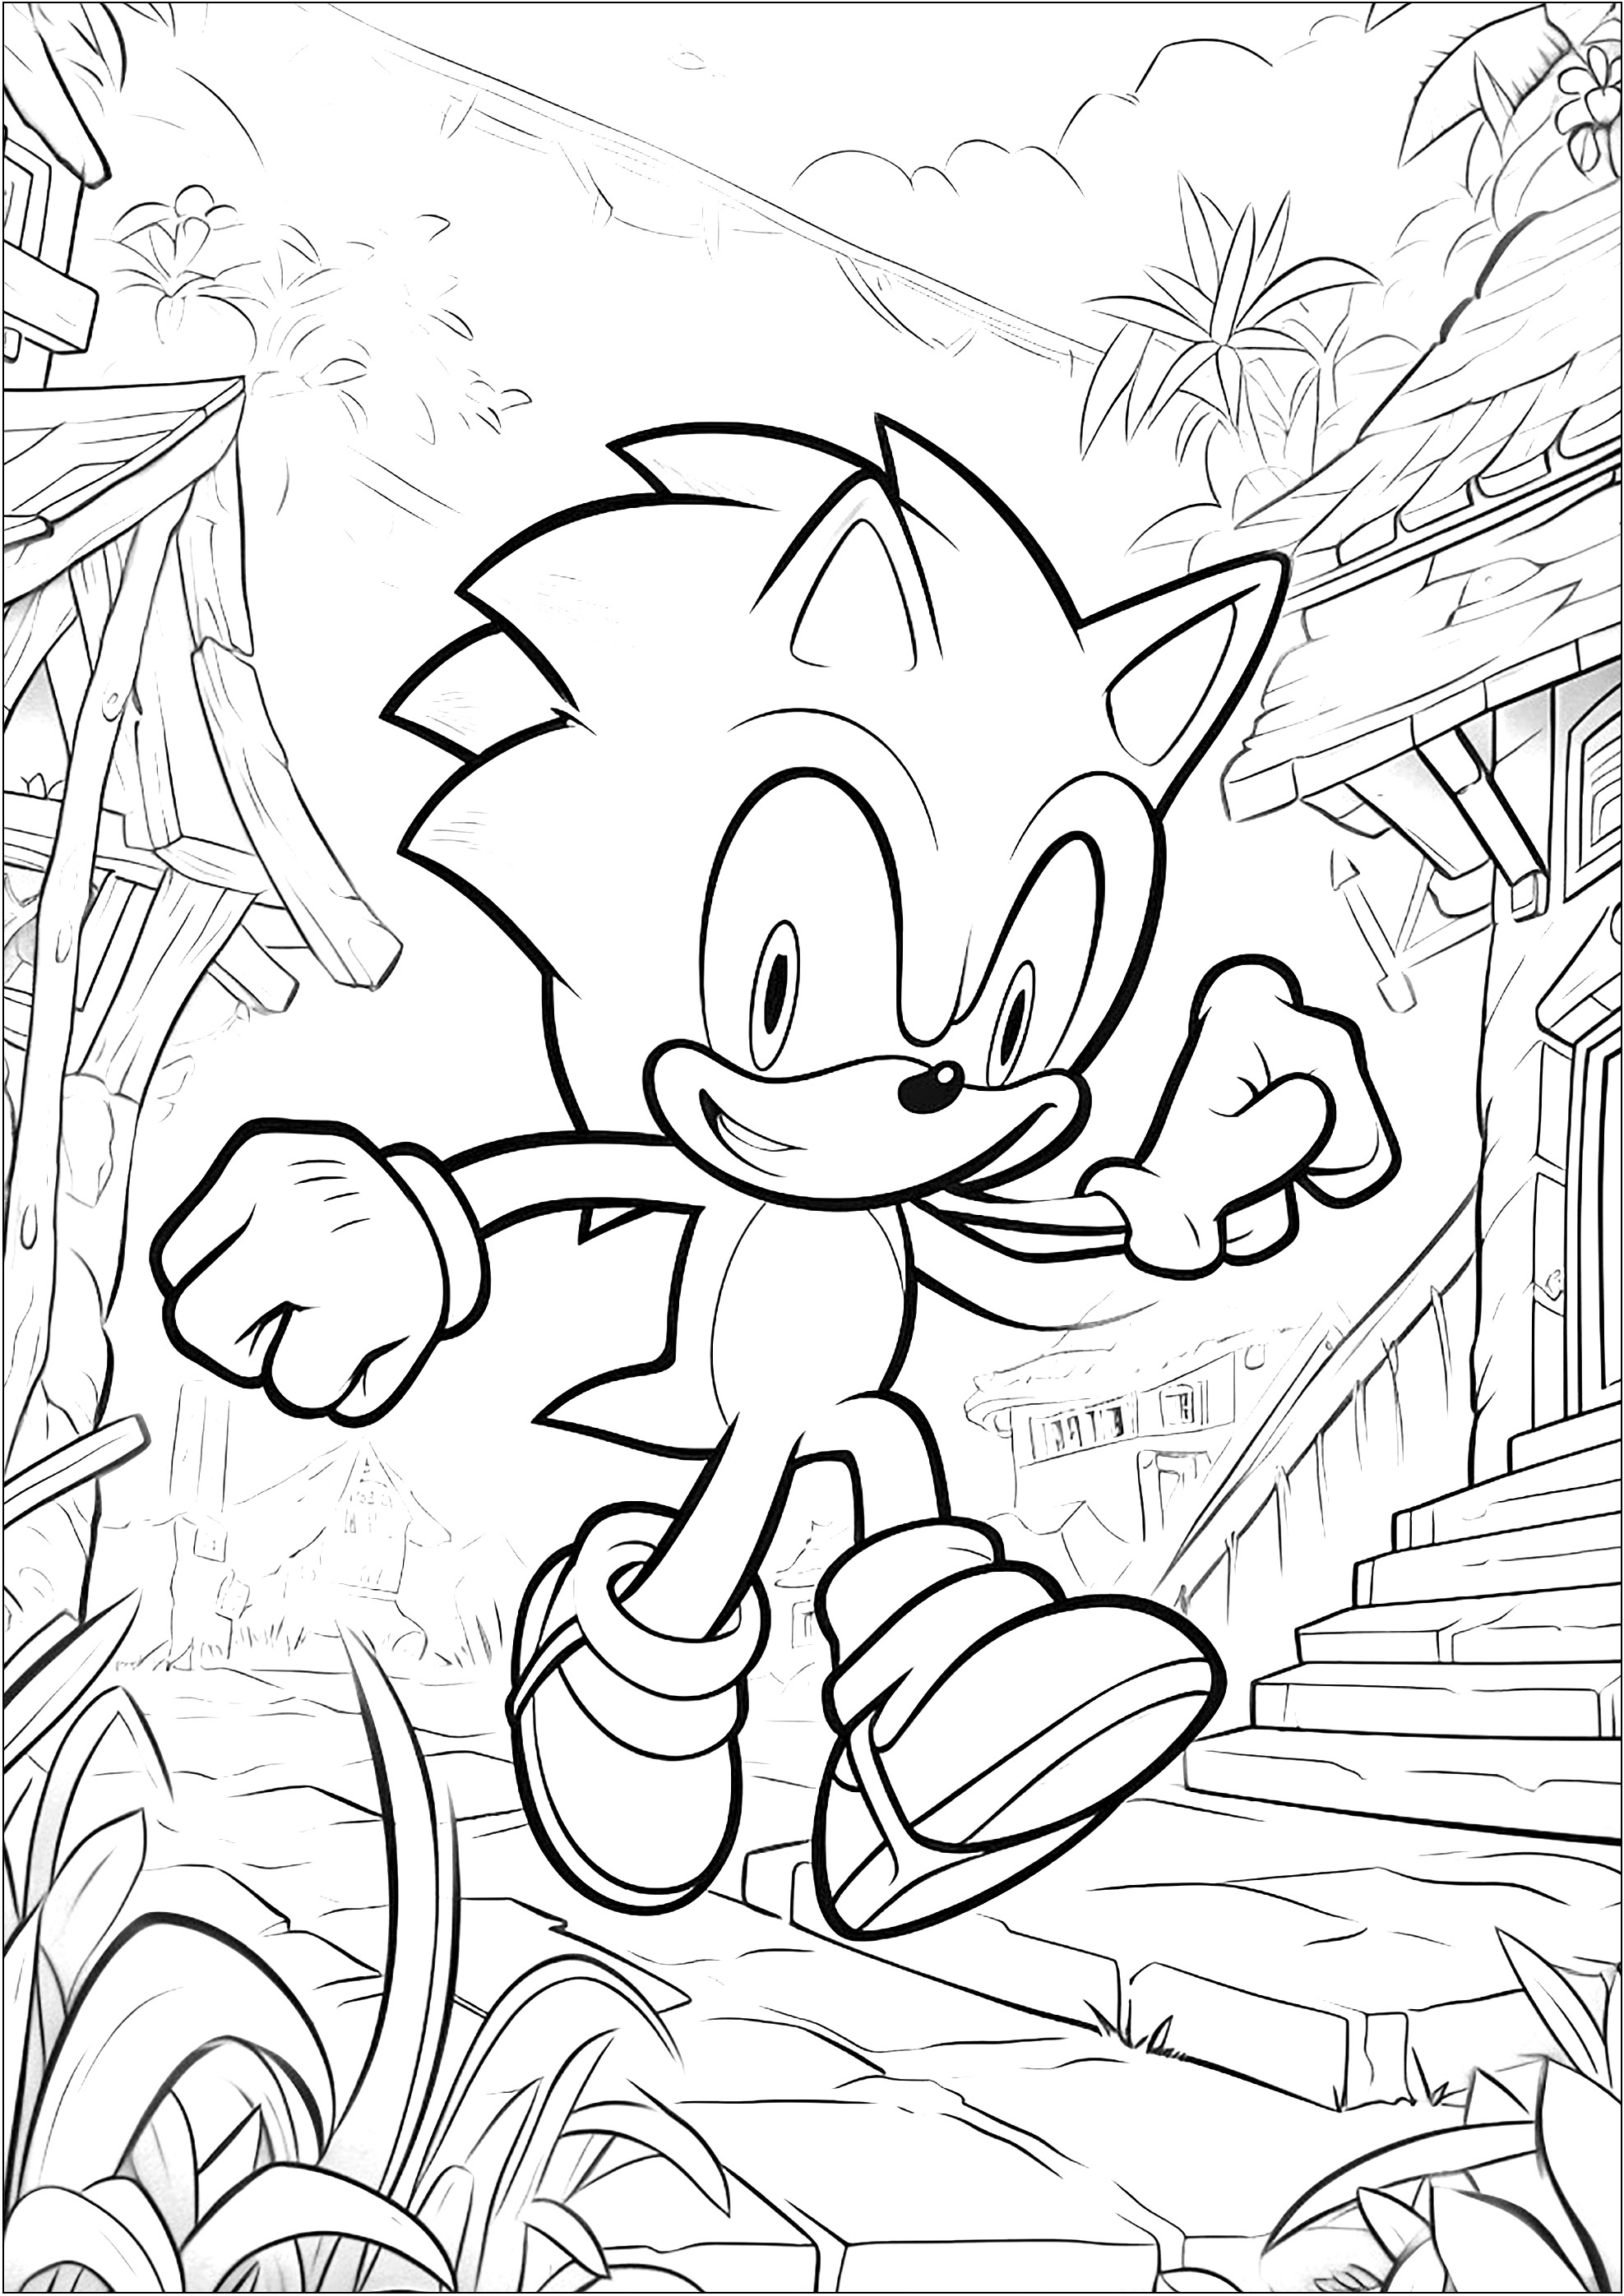 Sonic on a mission in a remote village